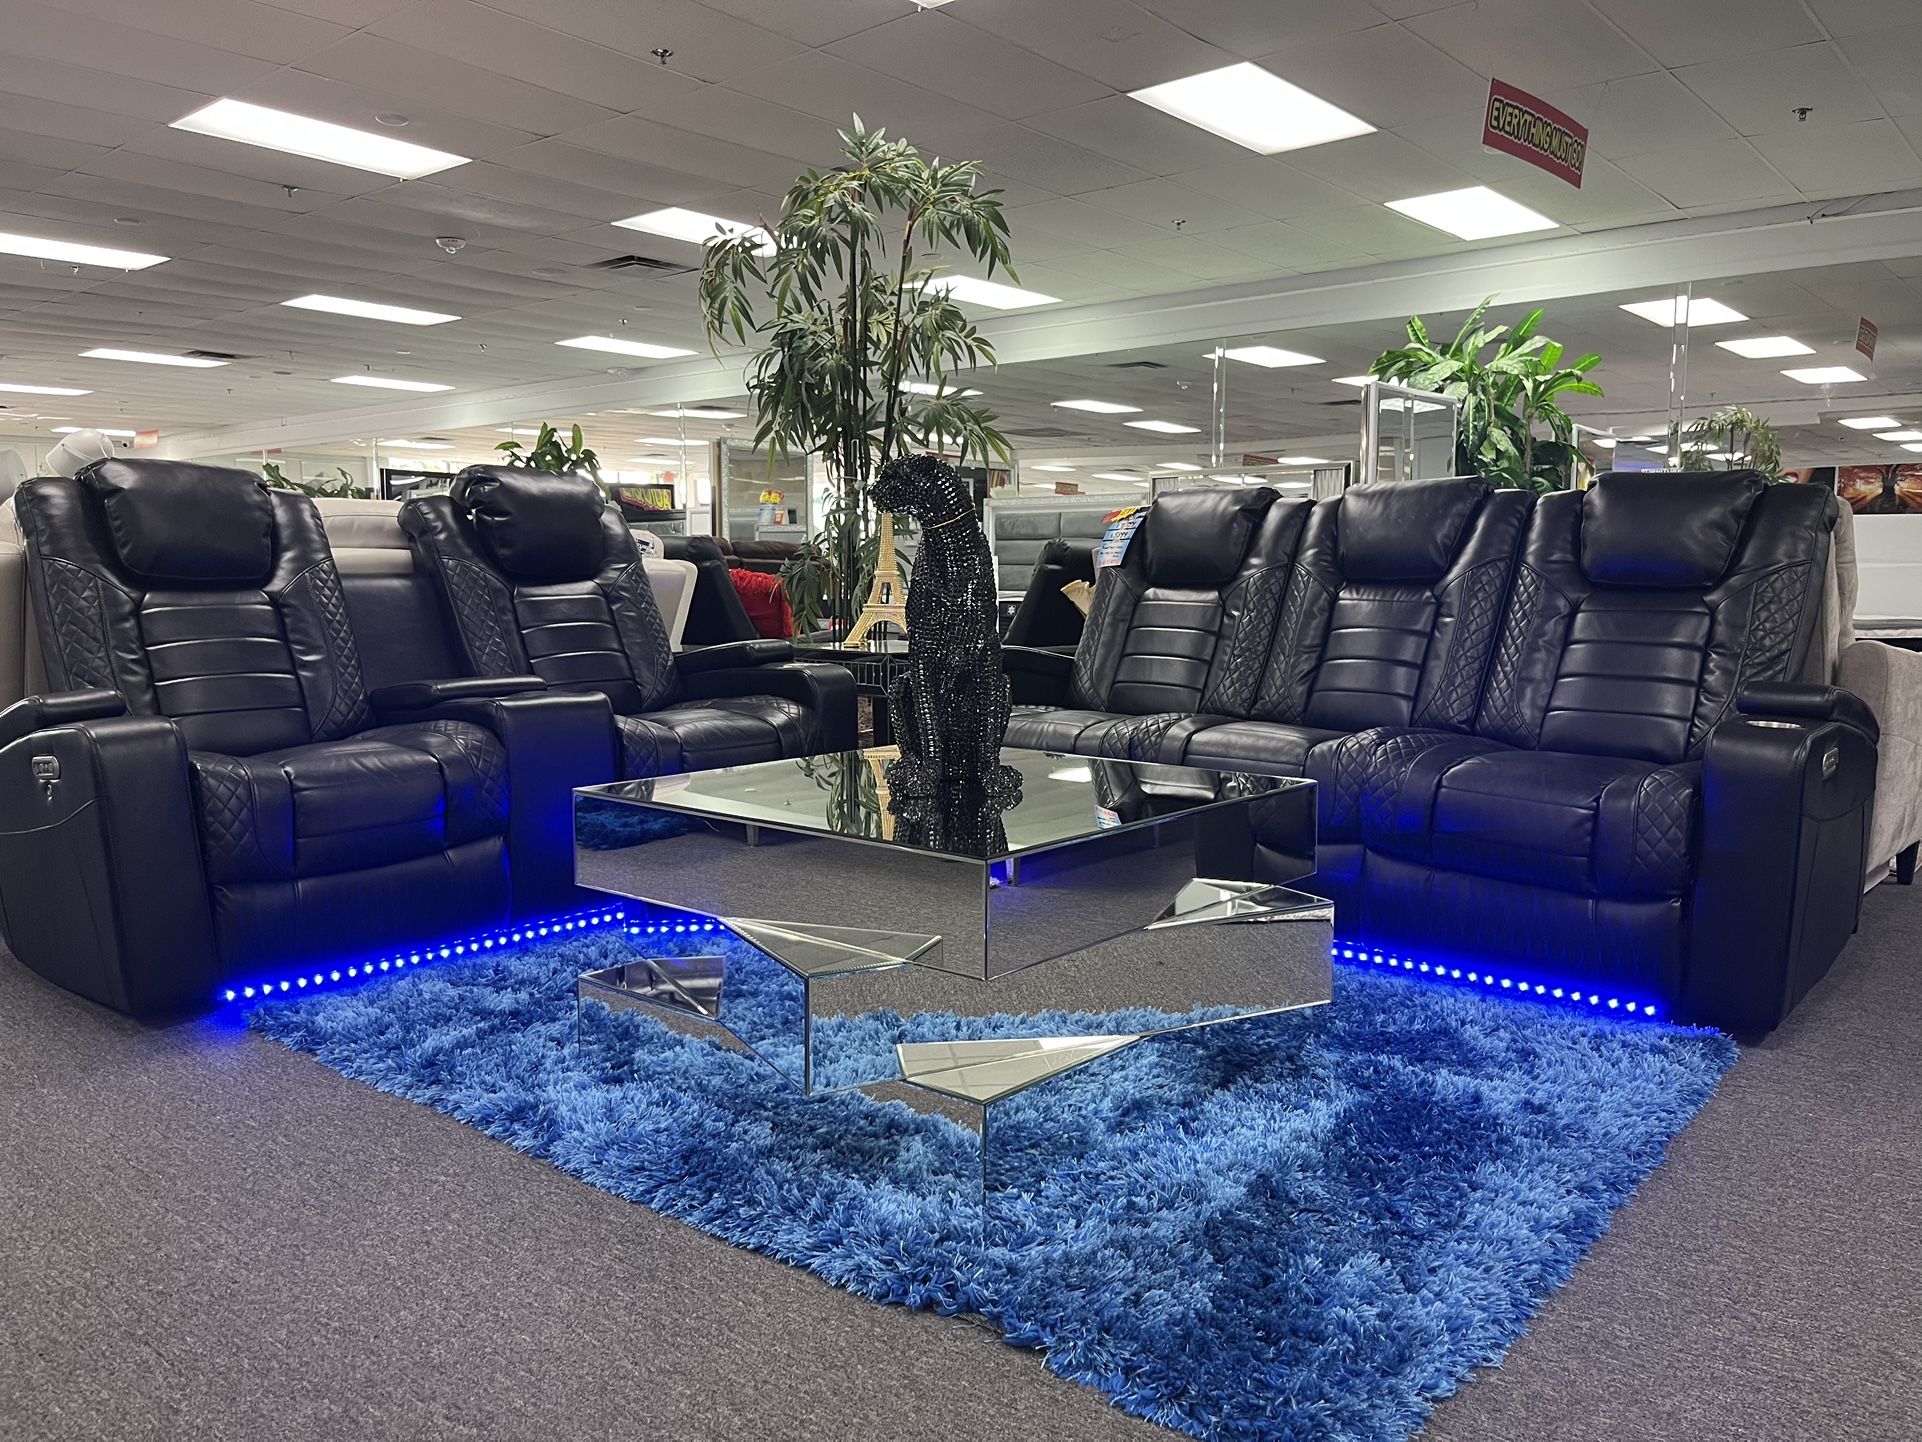 Mother Day Furniture Liquidation Sale !! Power Sofa & Love Seat Available In Grey & Black Only $2499 With Free Rug Included If You Mention This Add! 